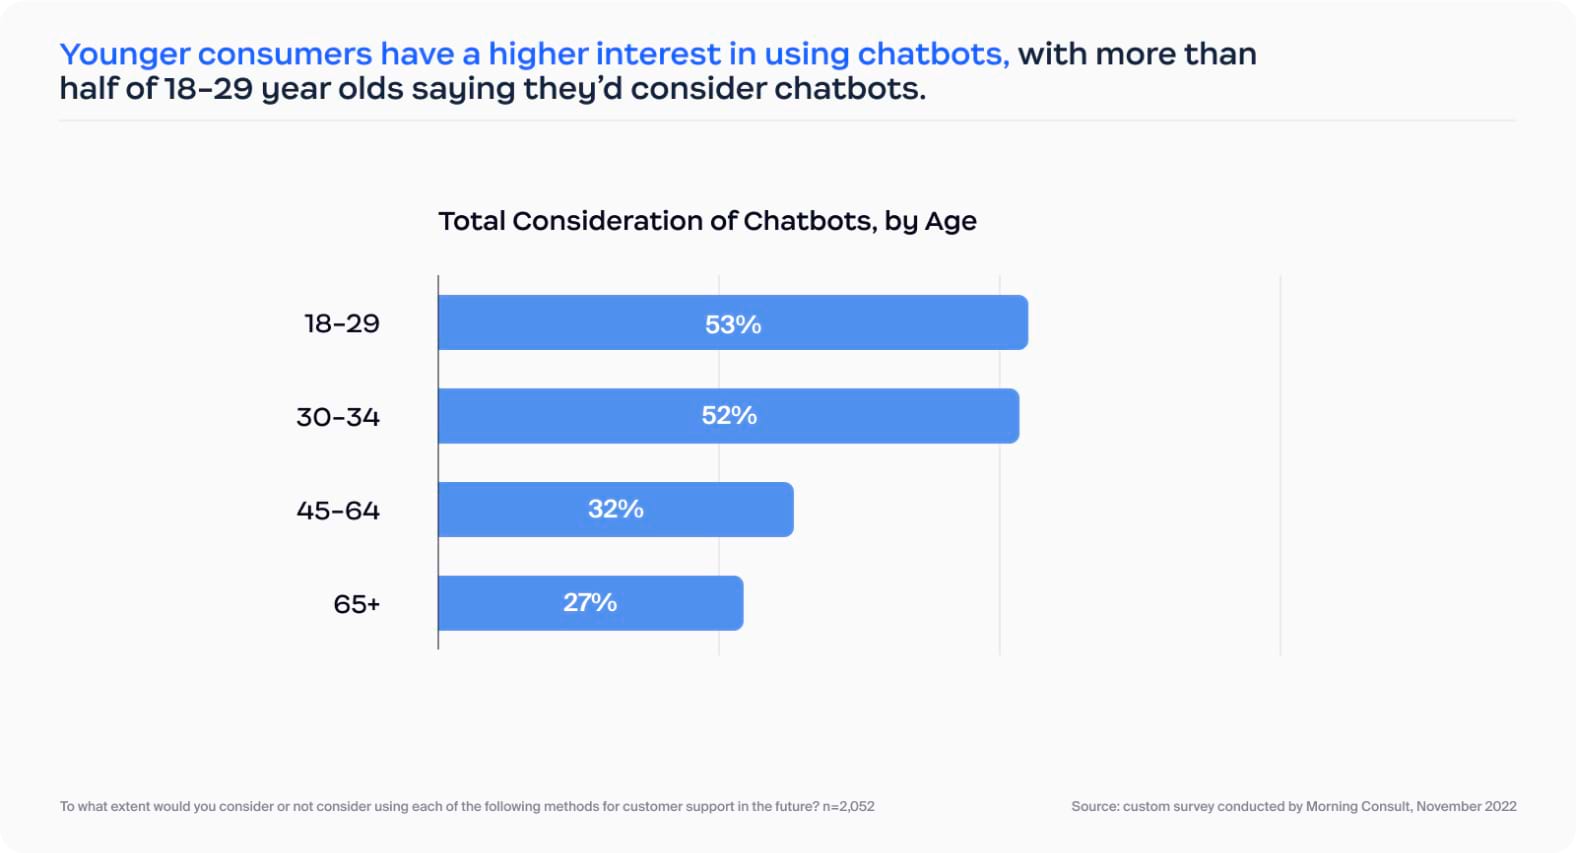 Younger consumers have a higher interest in using chatbots